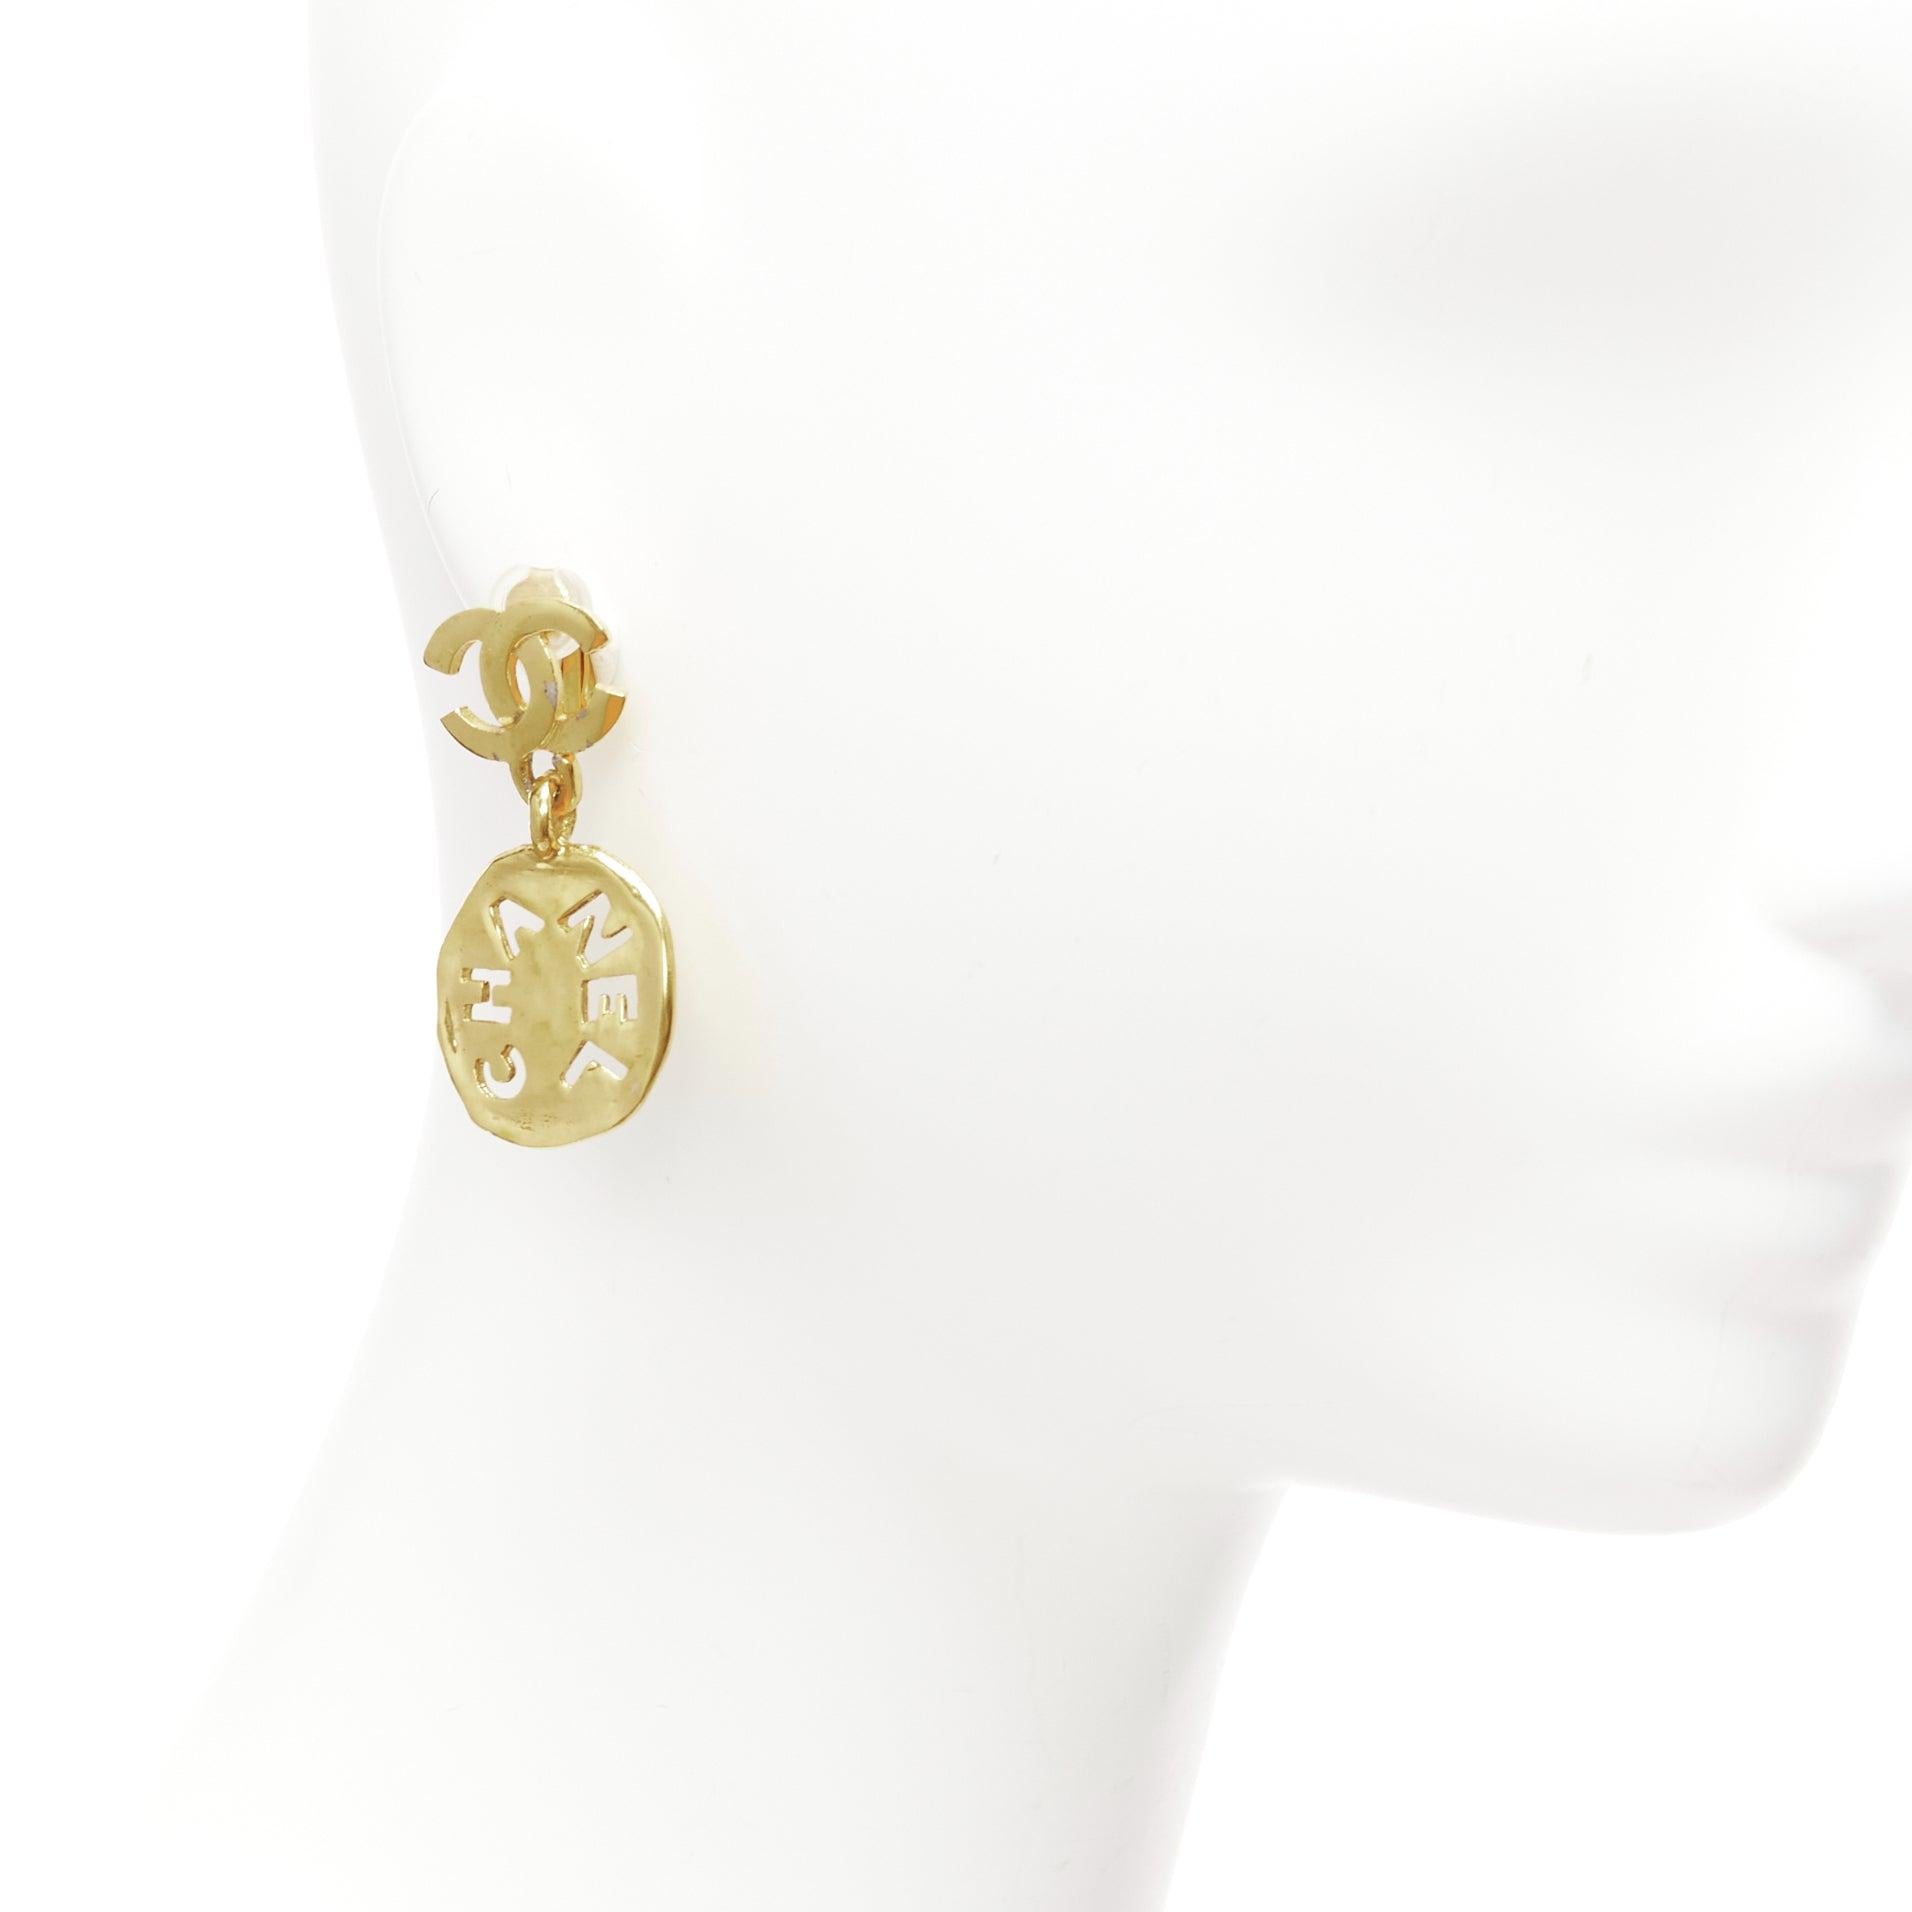 rare CHANEL Vintage gold CC logo cut out hammered coin clip on earrings
Reference: TGAS/D00905
Brand: Chanel
Designer: Karl Lagerfeld
Material: Metal
Color: Gold
Pattern: Solid
Closure: Clip On
Lining: Gold Metal

CONDITION:
Condition: Good, this